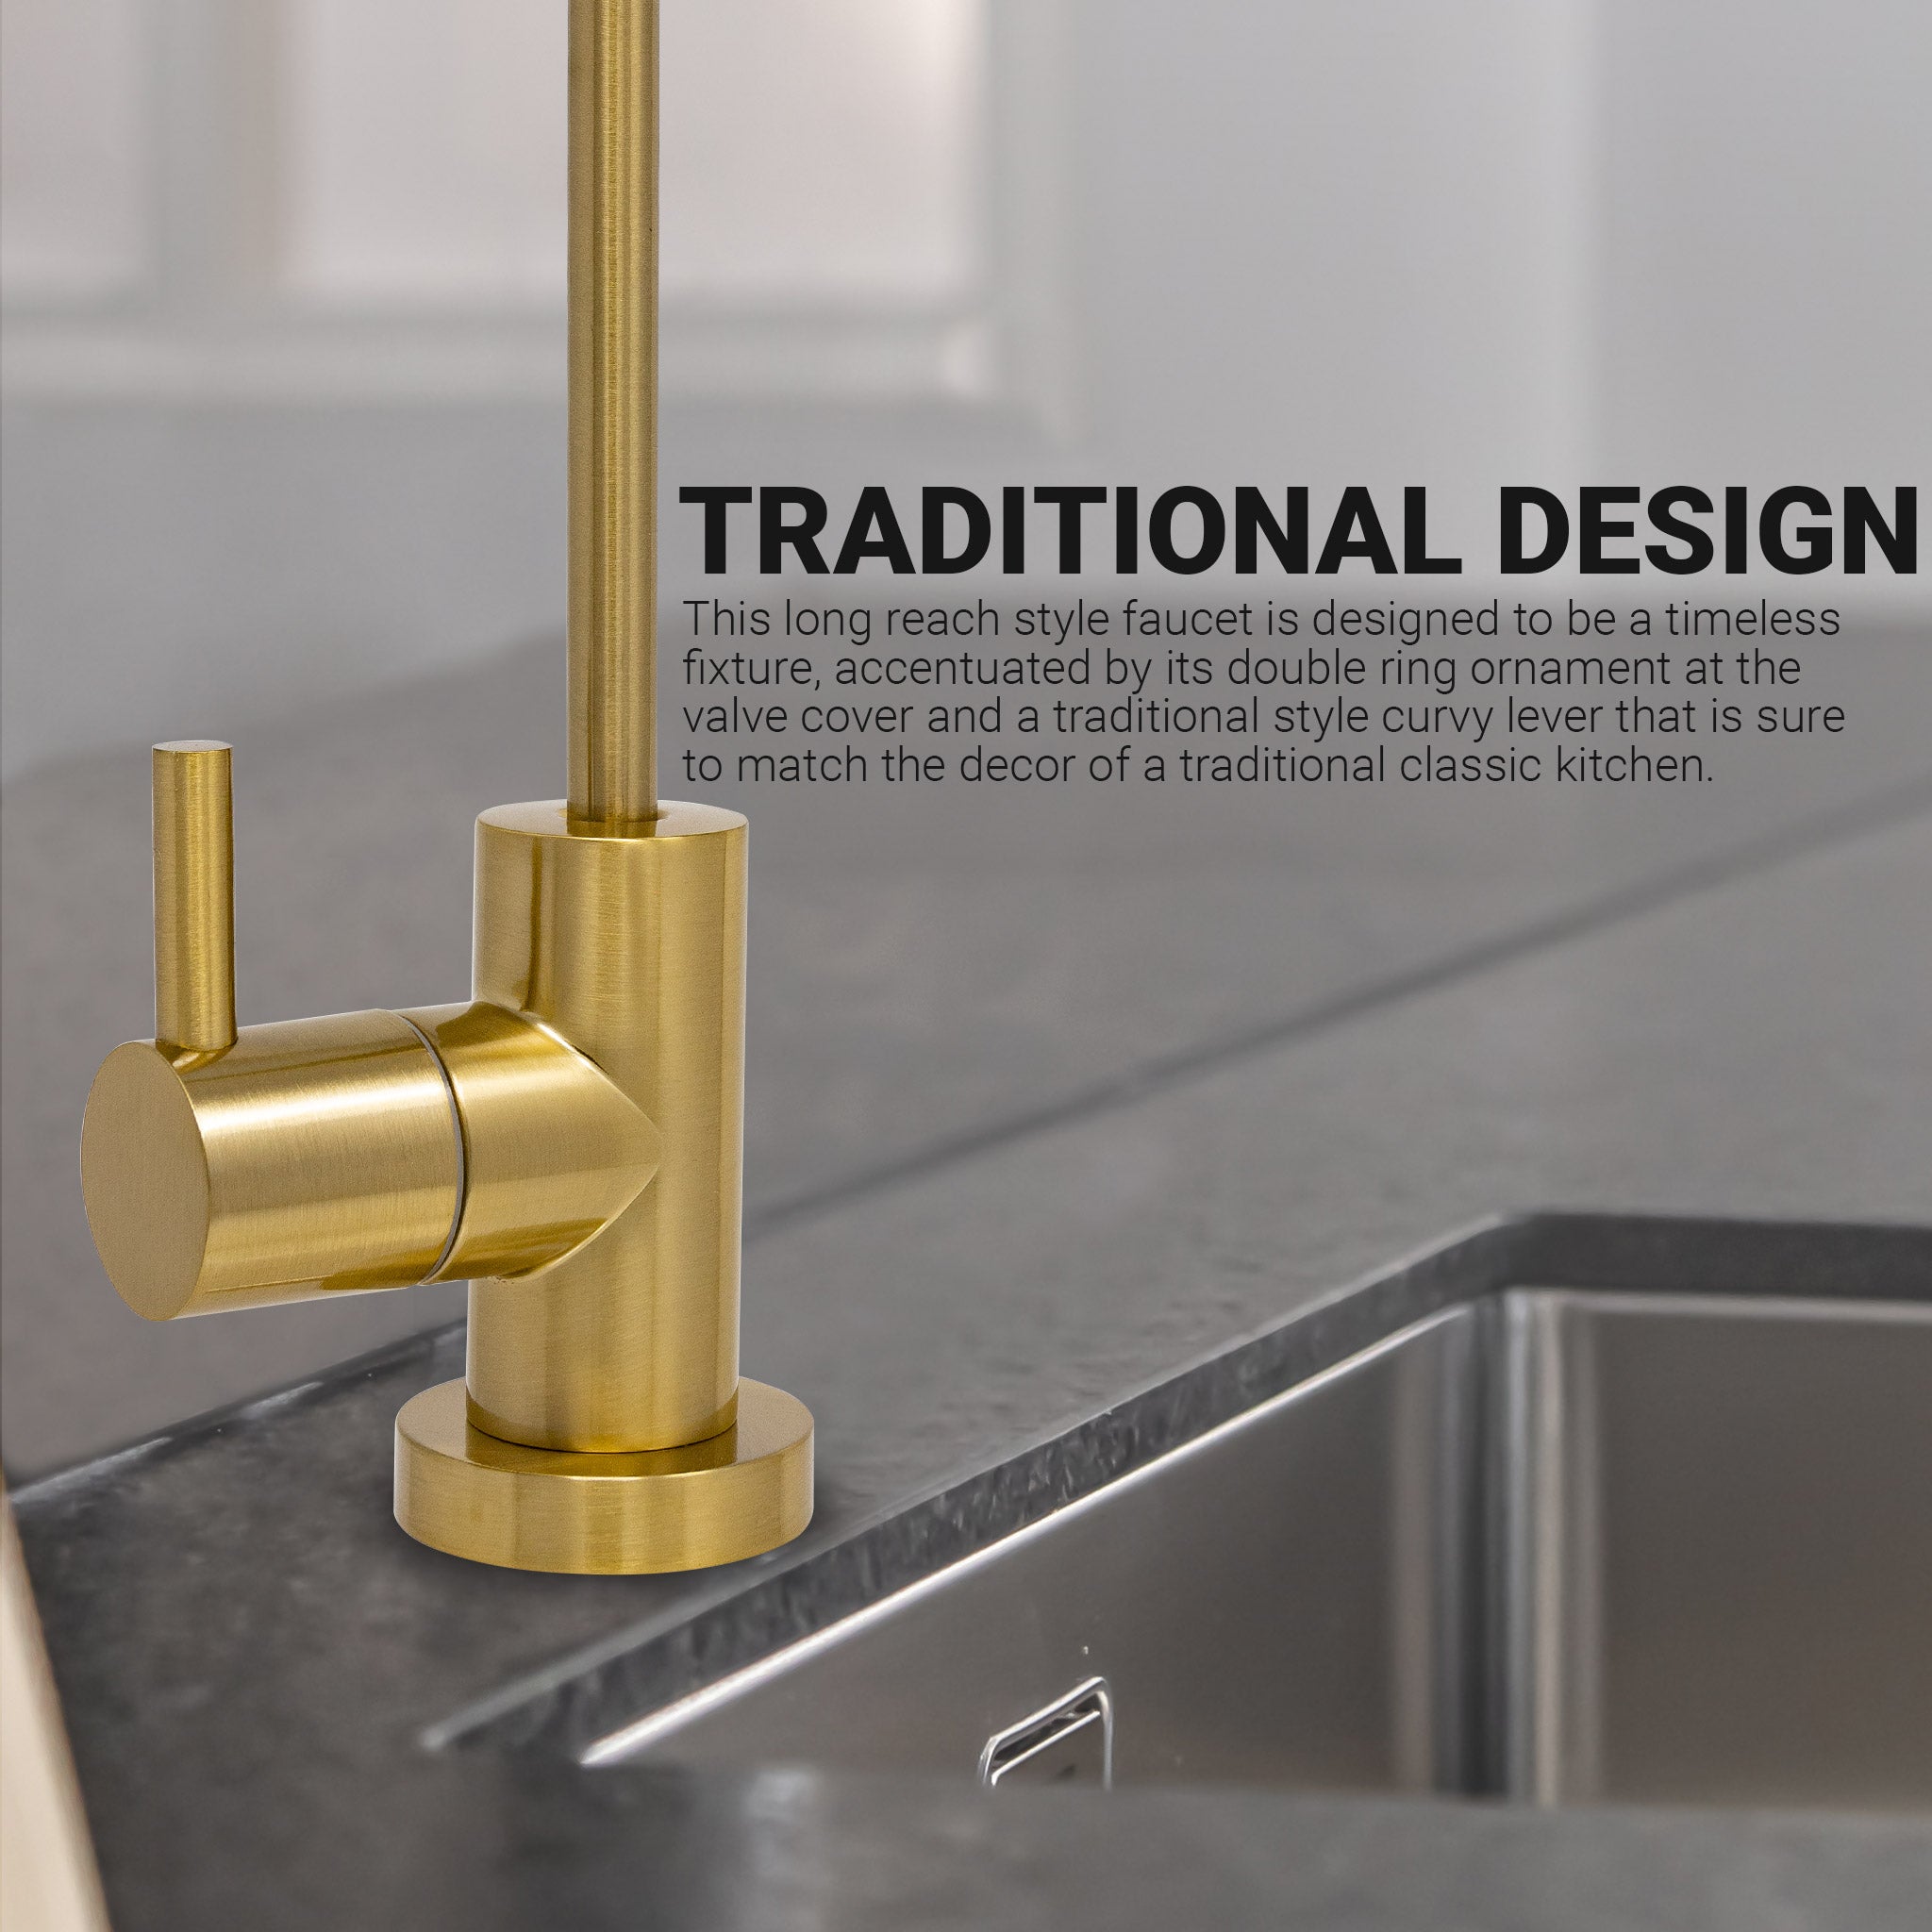 Water Filtration Faucet Brushed Gold Euro Style Reverse Osmosis Non Air Gap. Certified by NSF.